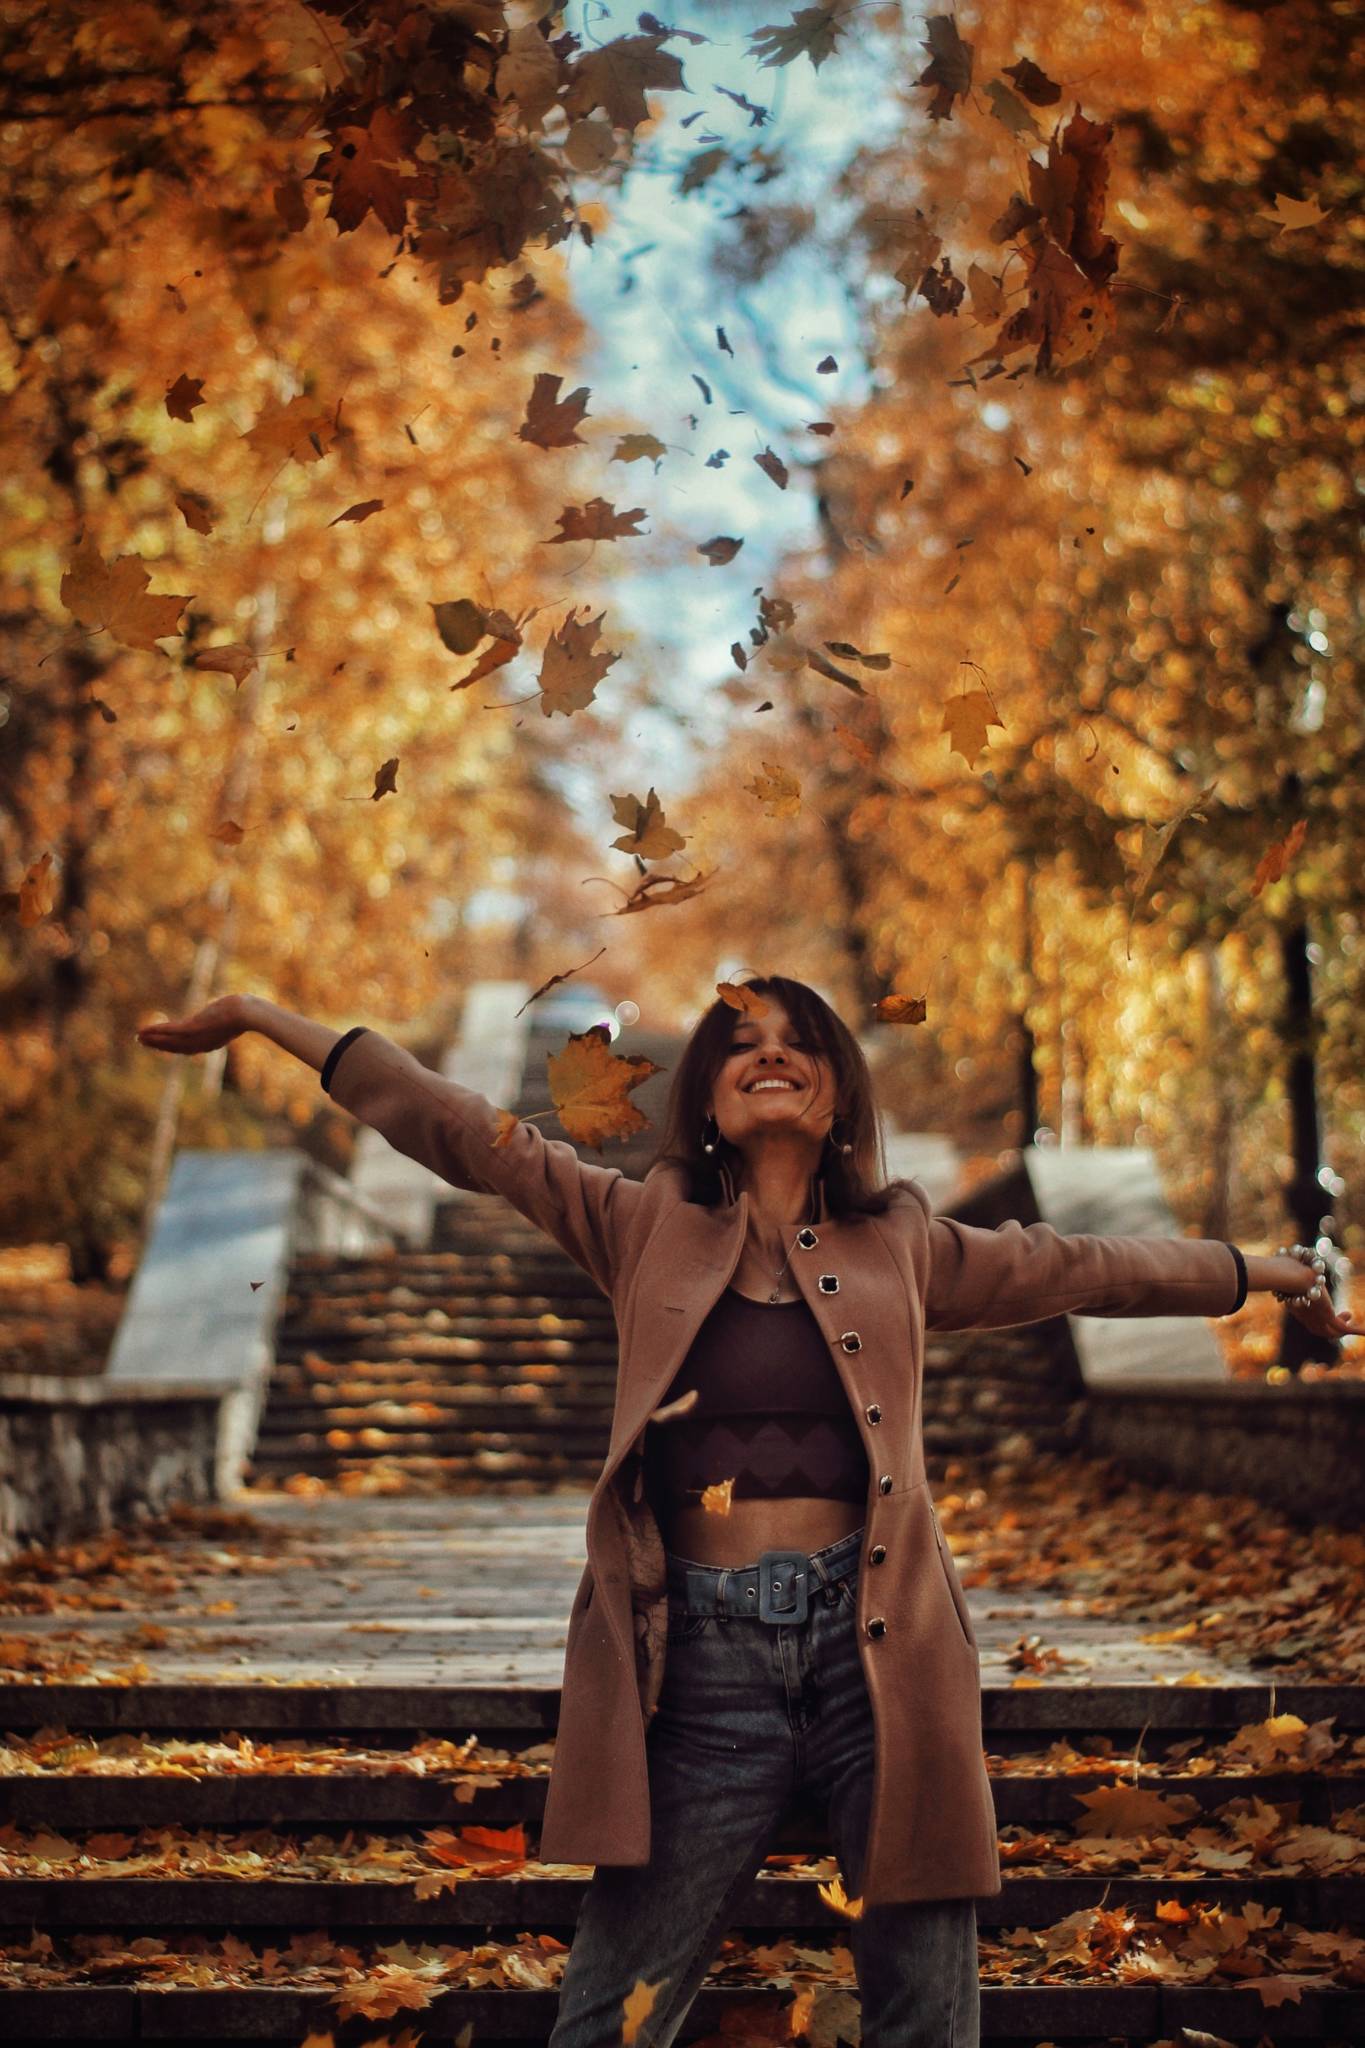 woman outside on steps smiling and looking up as leaves fall from trees